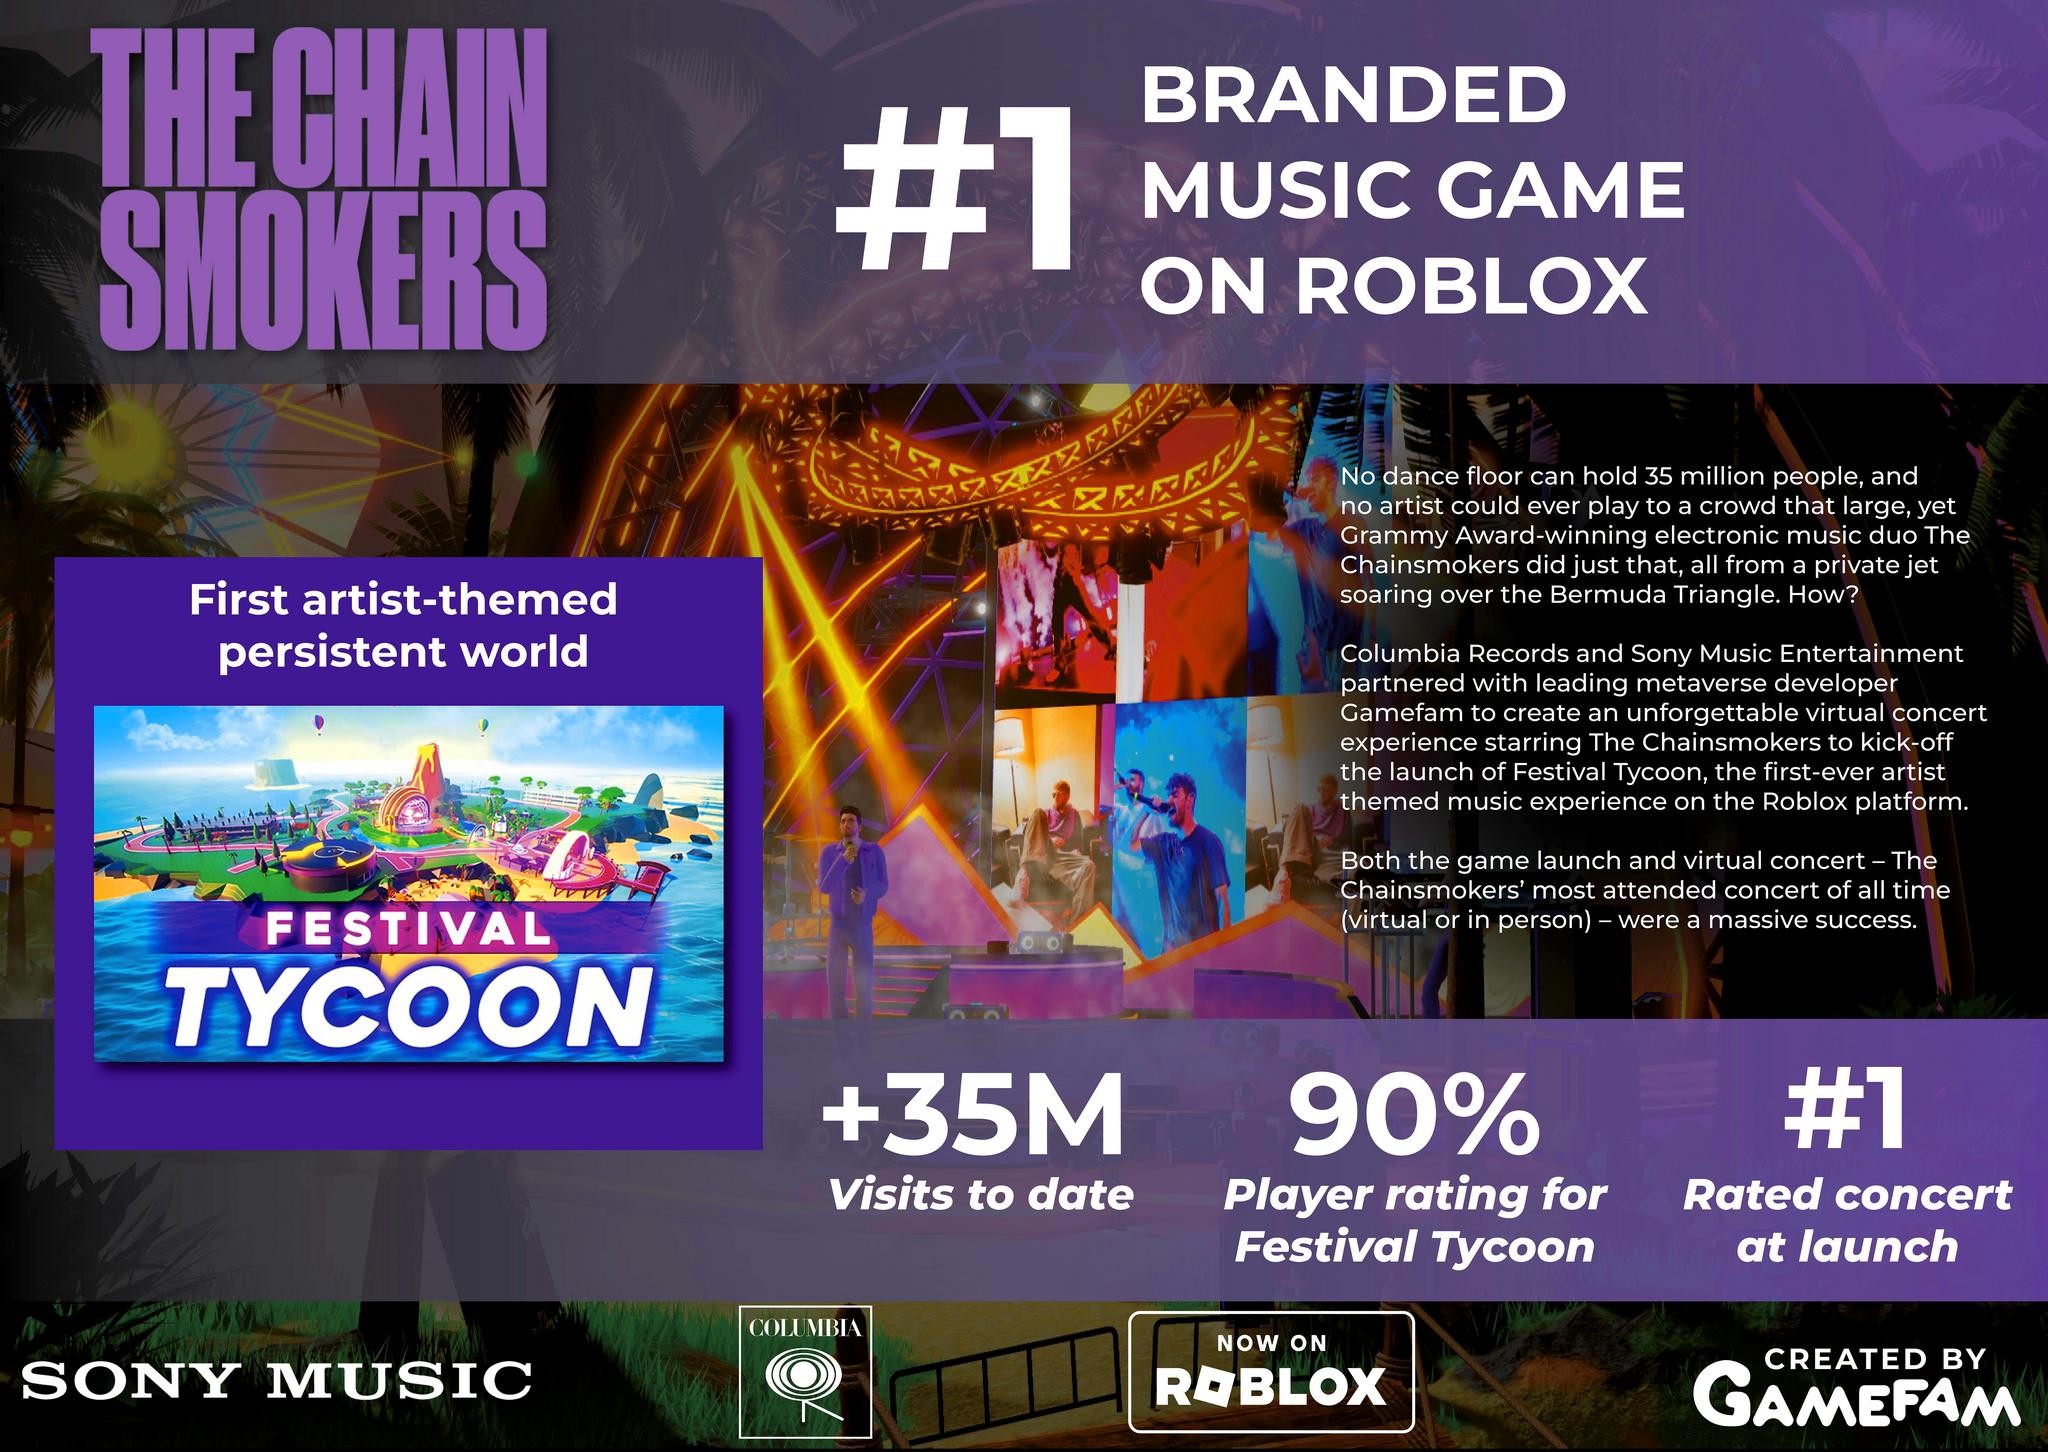 THE CHAINSMOKERS HOST DEBUT METAVERSE CONCERT AND LAUNCH FESTIVAL TYCOON ON ROBLOX